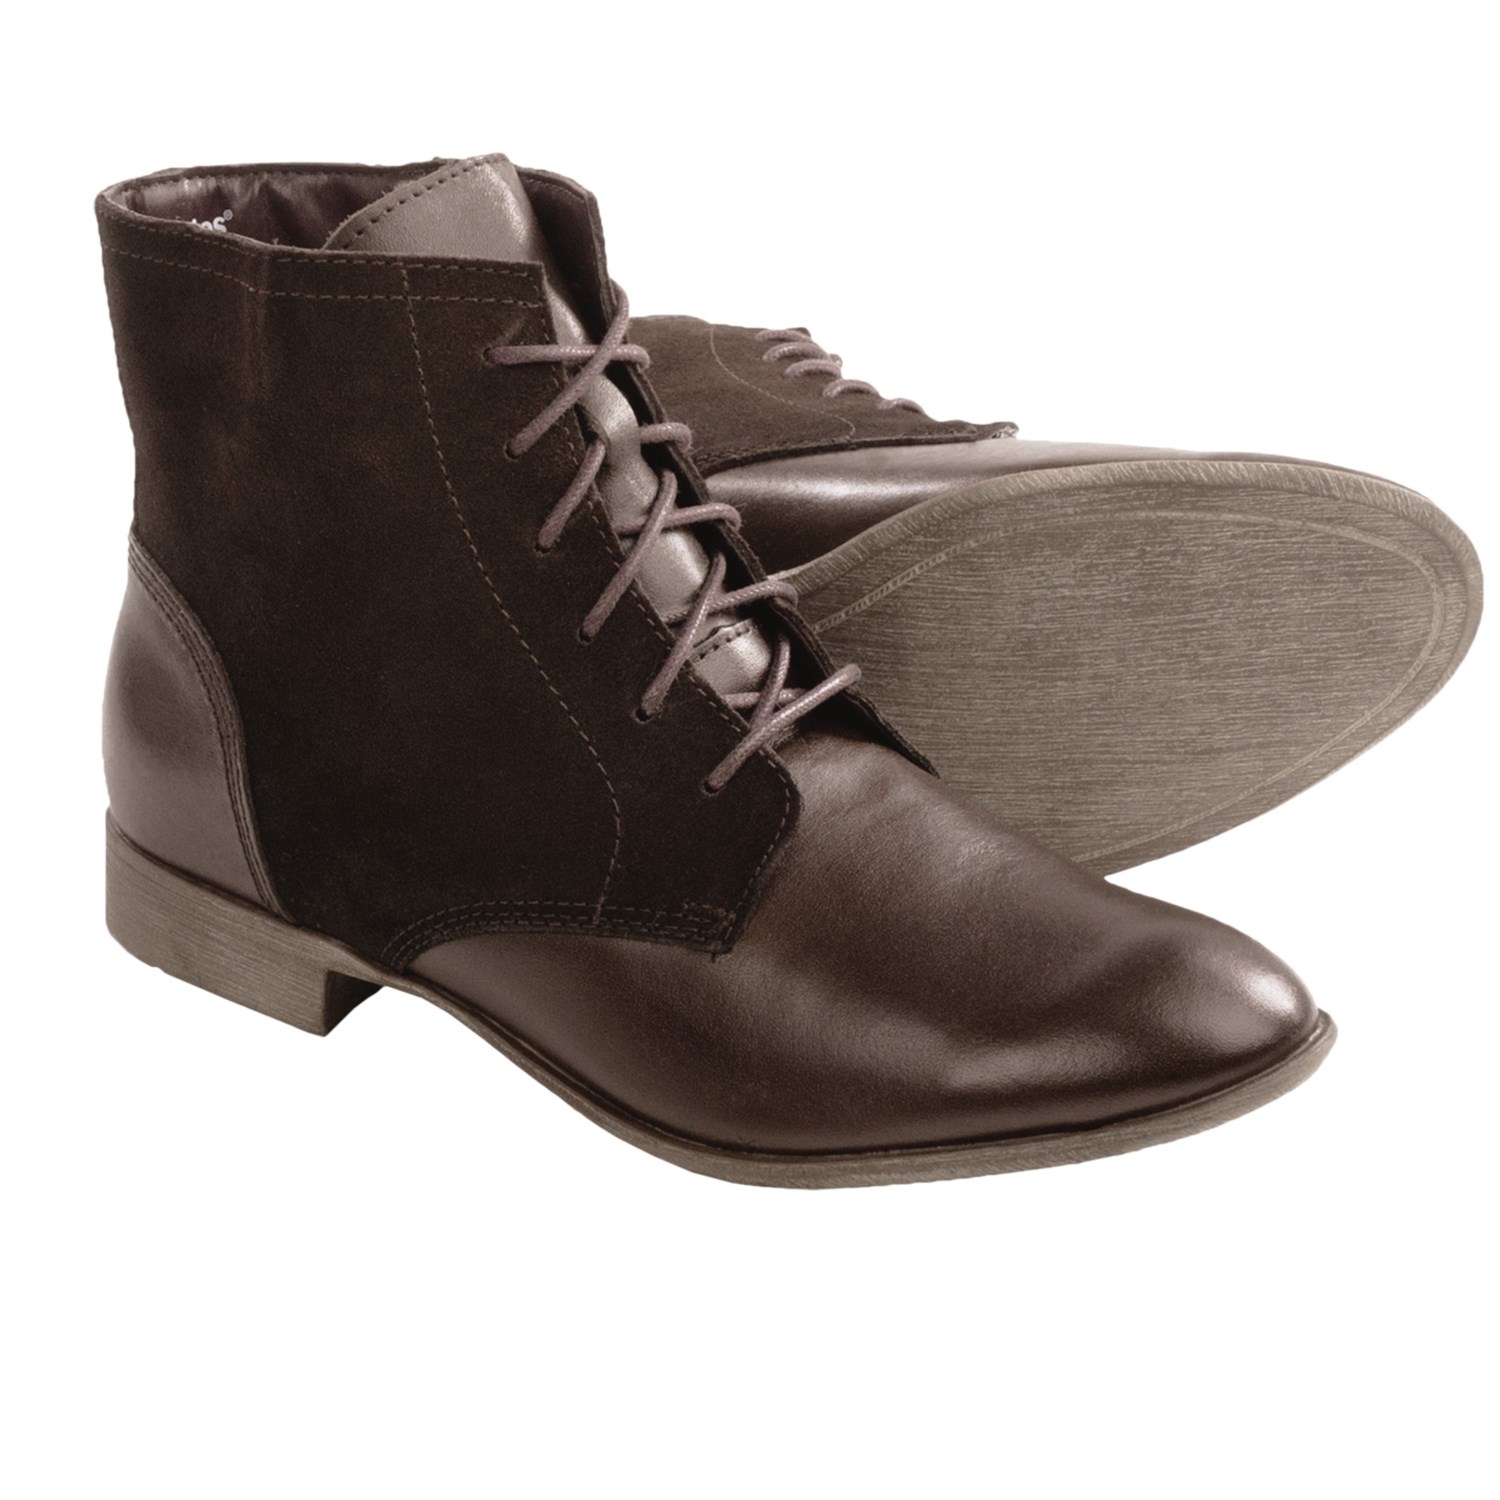 Hush Puppies Farland Ankle Boots (For Women) 6817G - Save 54%